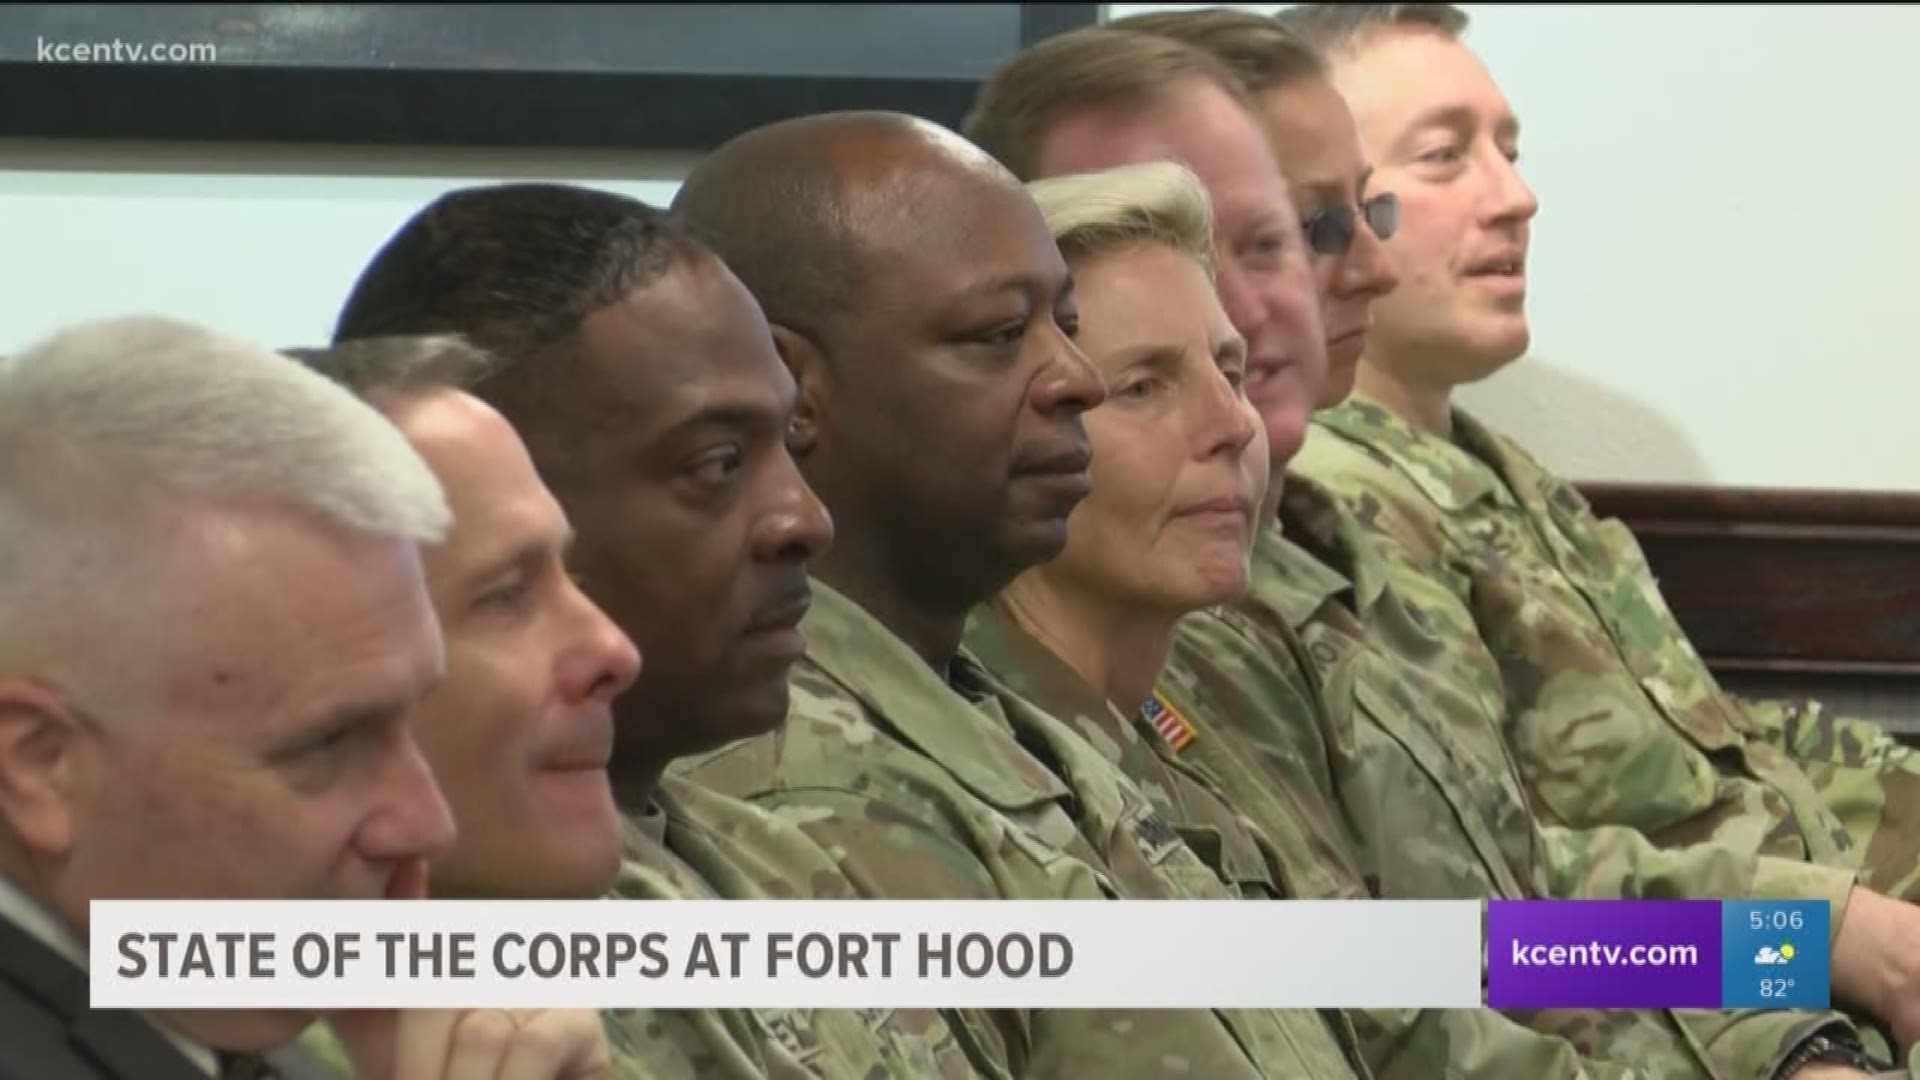 Fort Hood's III Core Commanding General presented the State of the Core where he addressed community leaders Friday morning.